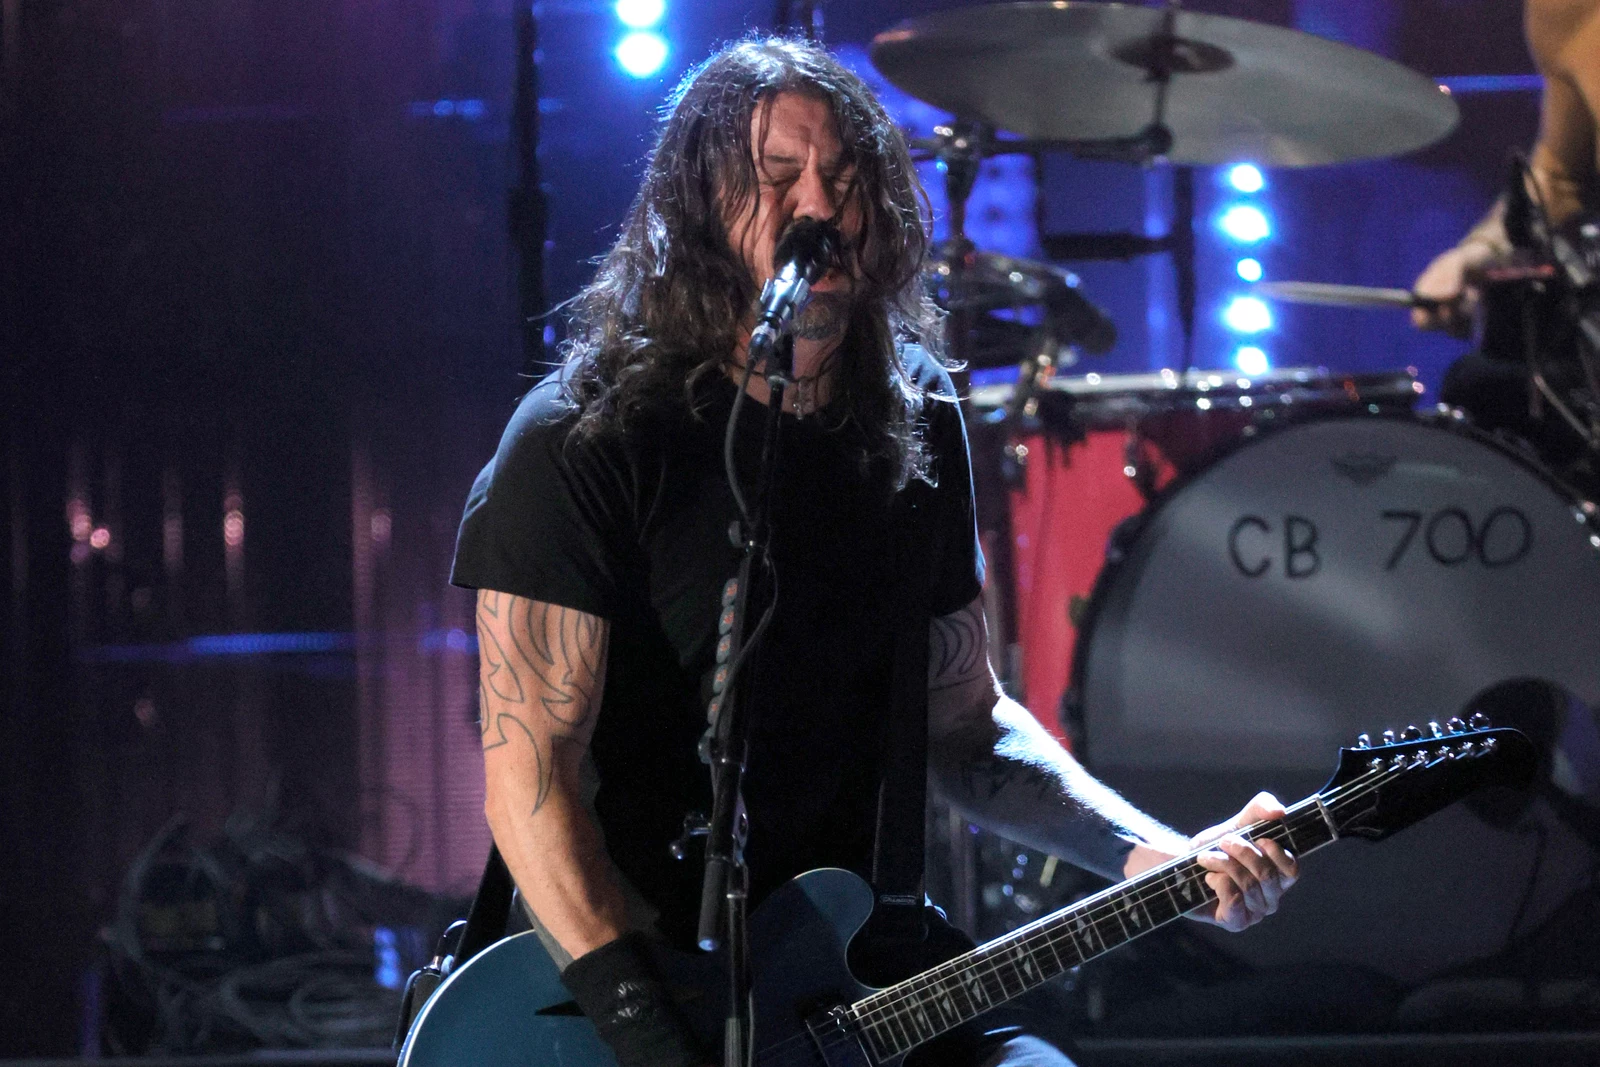 Dave Grohl Hosts 'Hanukkah Sessions’ Live Show in Los Angeles